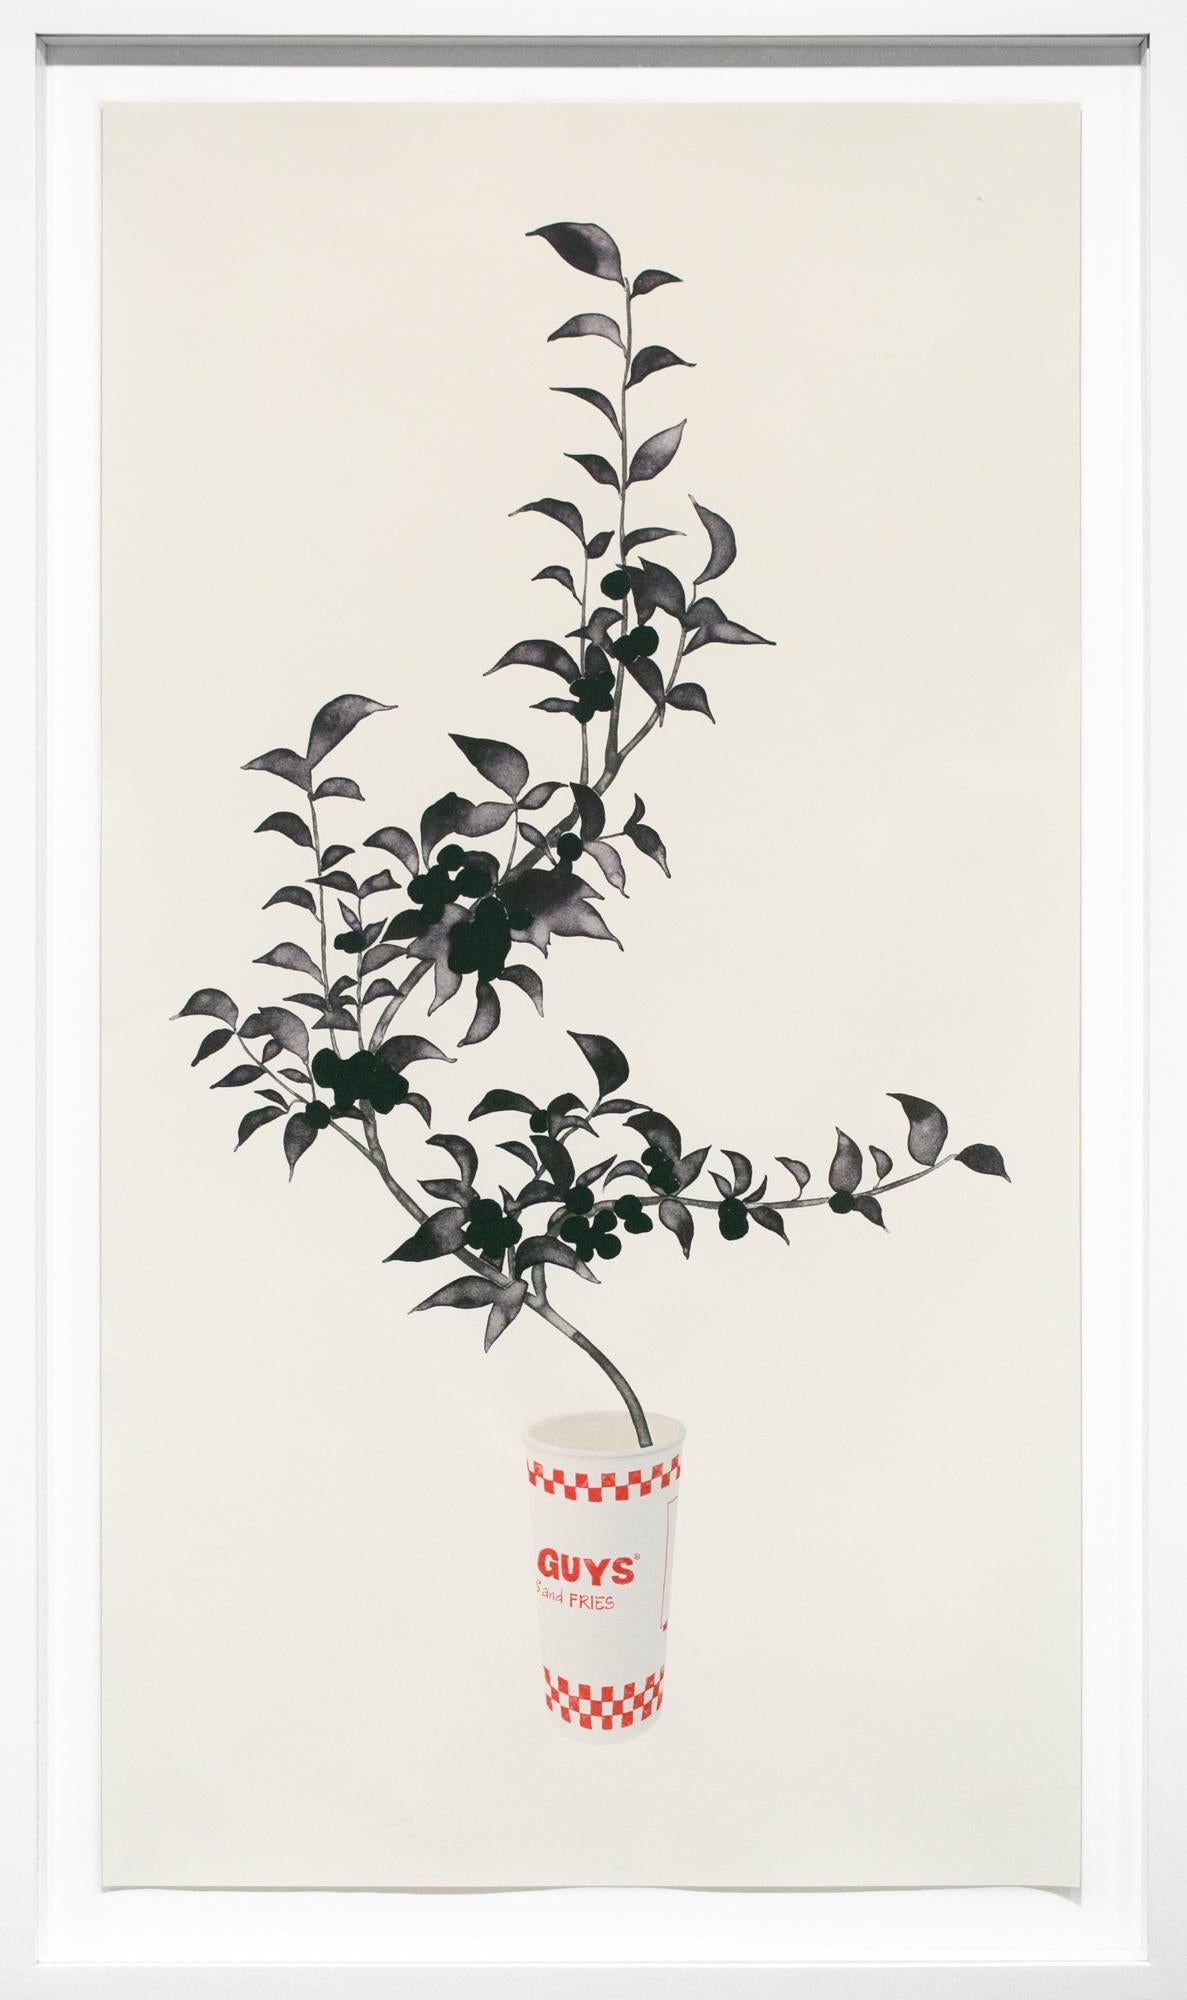 Yoonmi Nam Figurative Print - "Guys and Fries", Lithograph Print, Fast Food Cup and Floral Plant